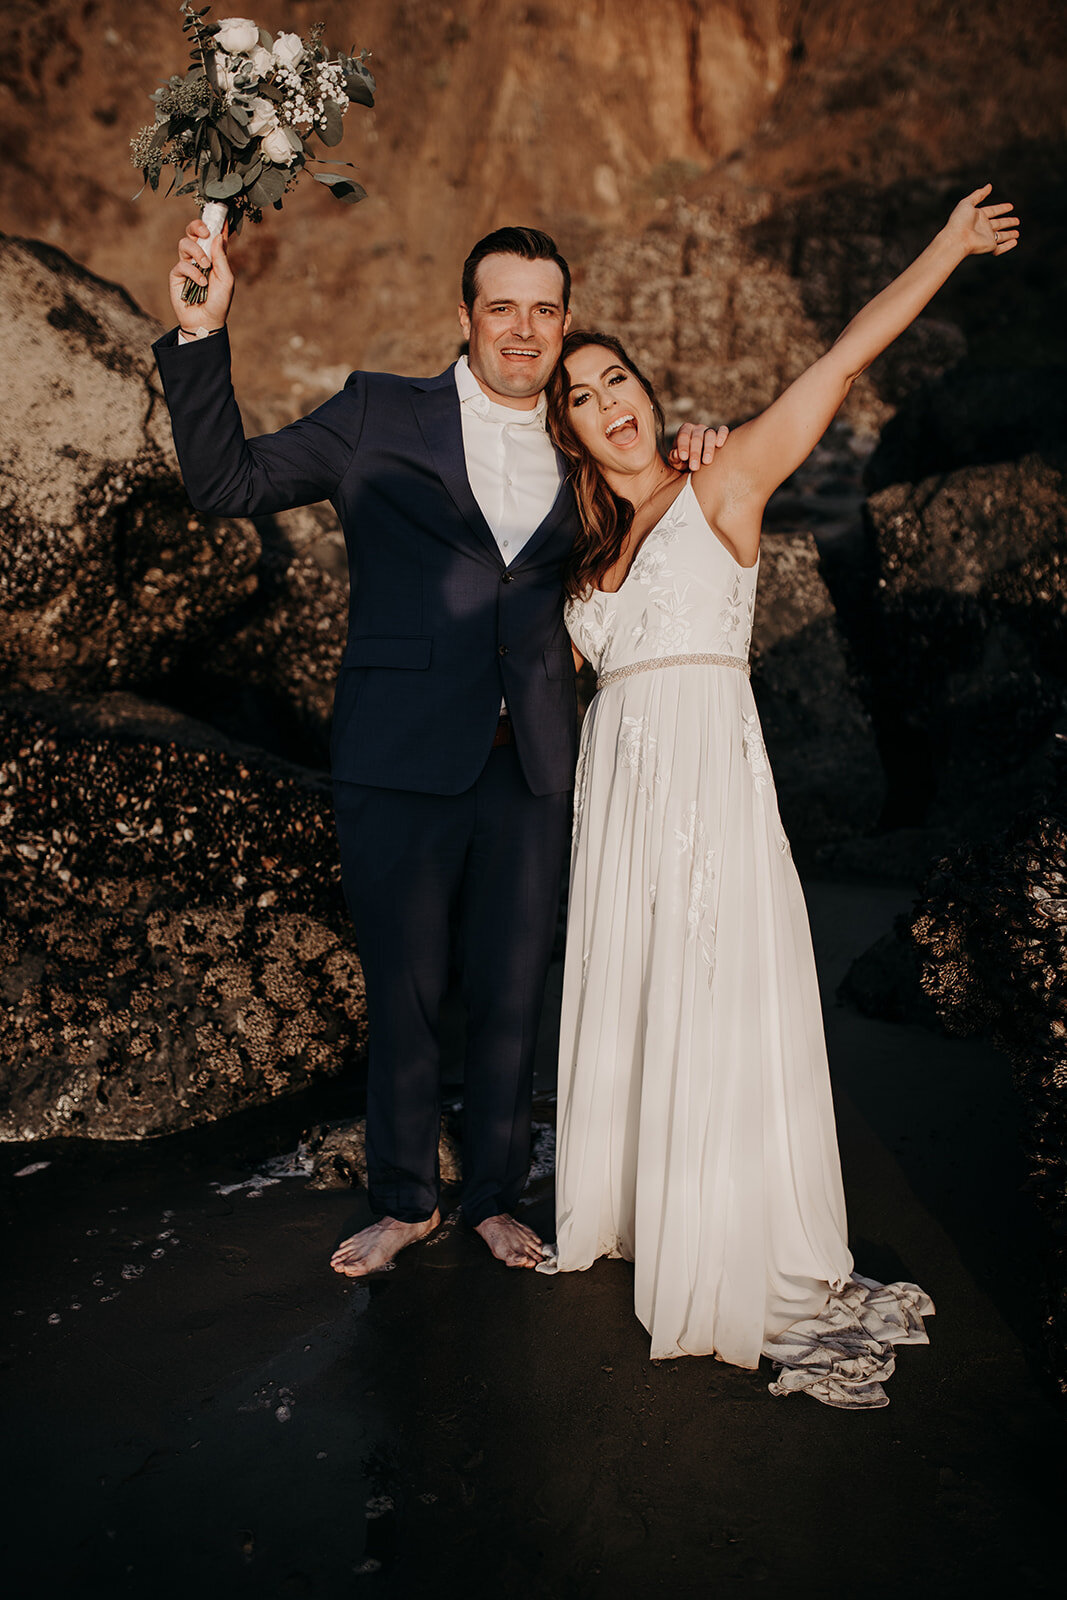 Bride & Groom cheering as they stand barefoot on a rocky beach